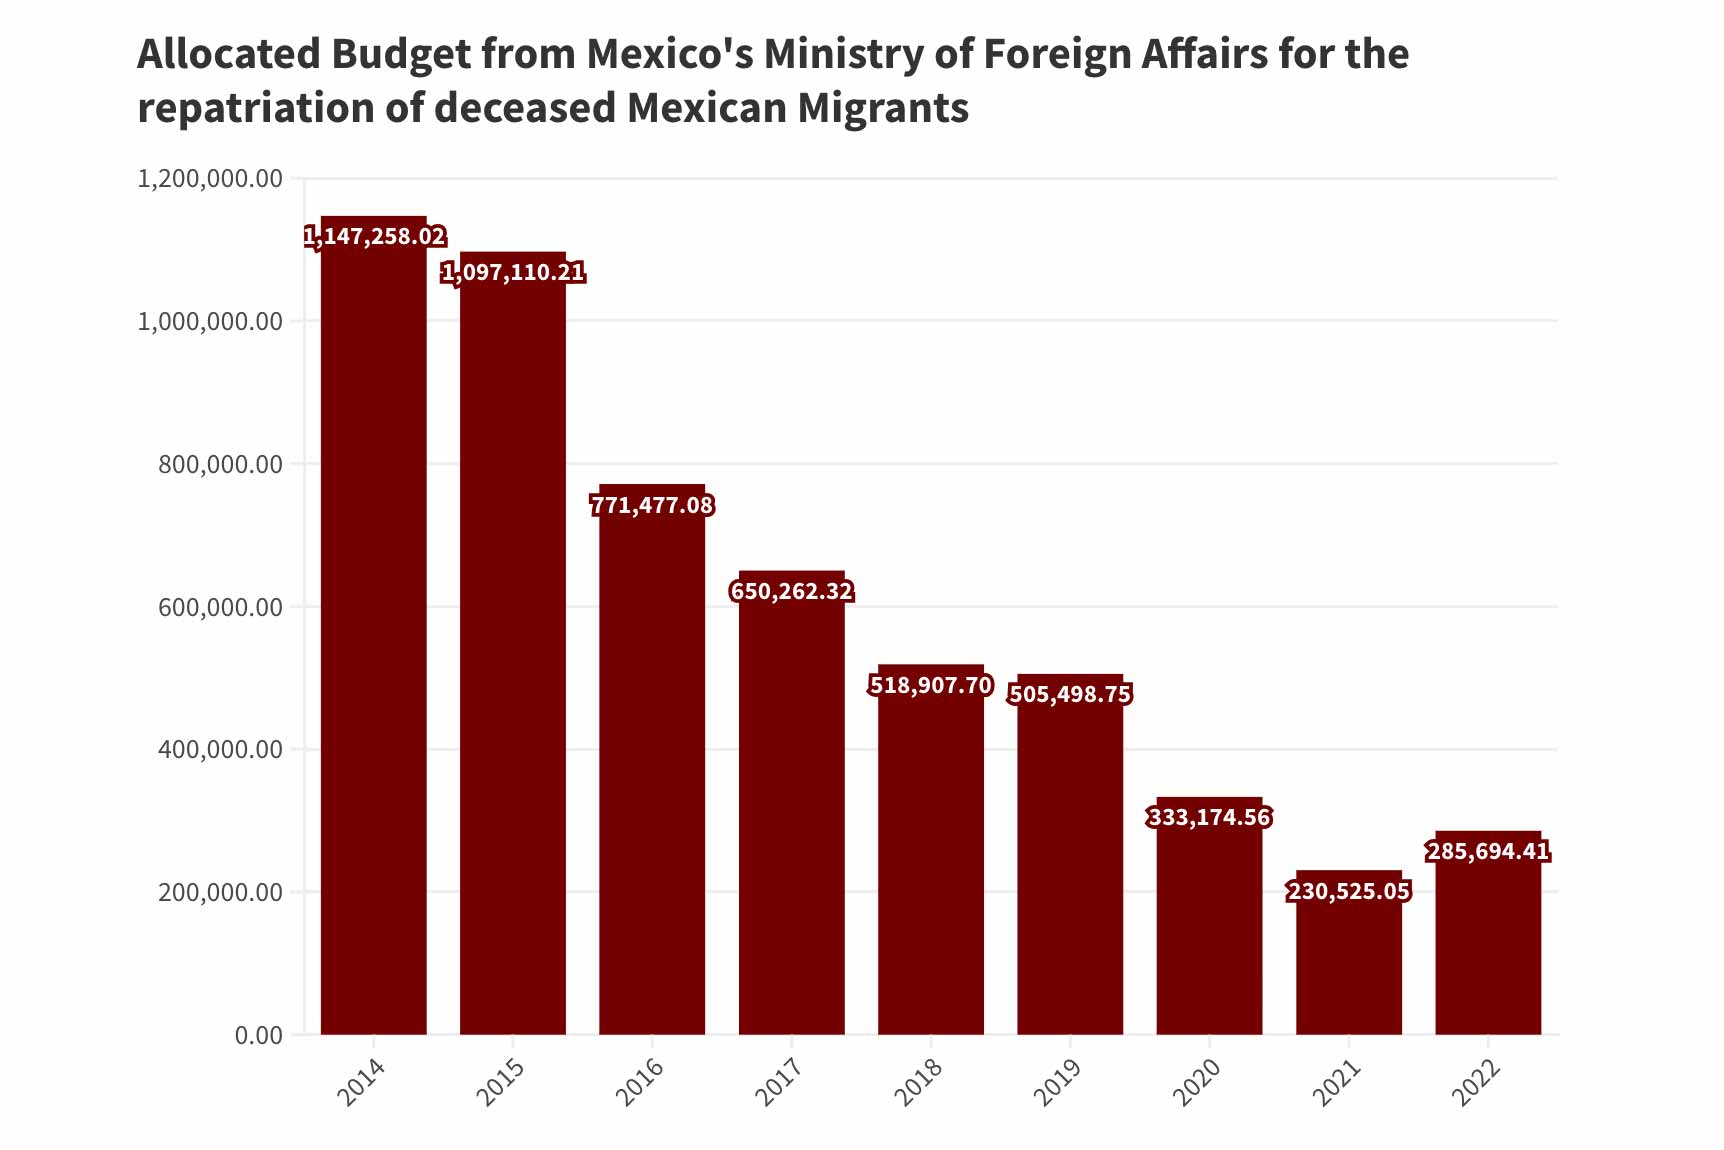 Source: Public data from Mexico's Ministry of Foreign Affairs requested by this investigative team. Made with Flourish.